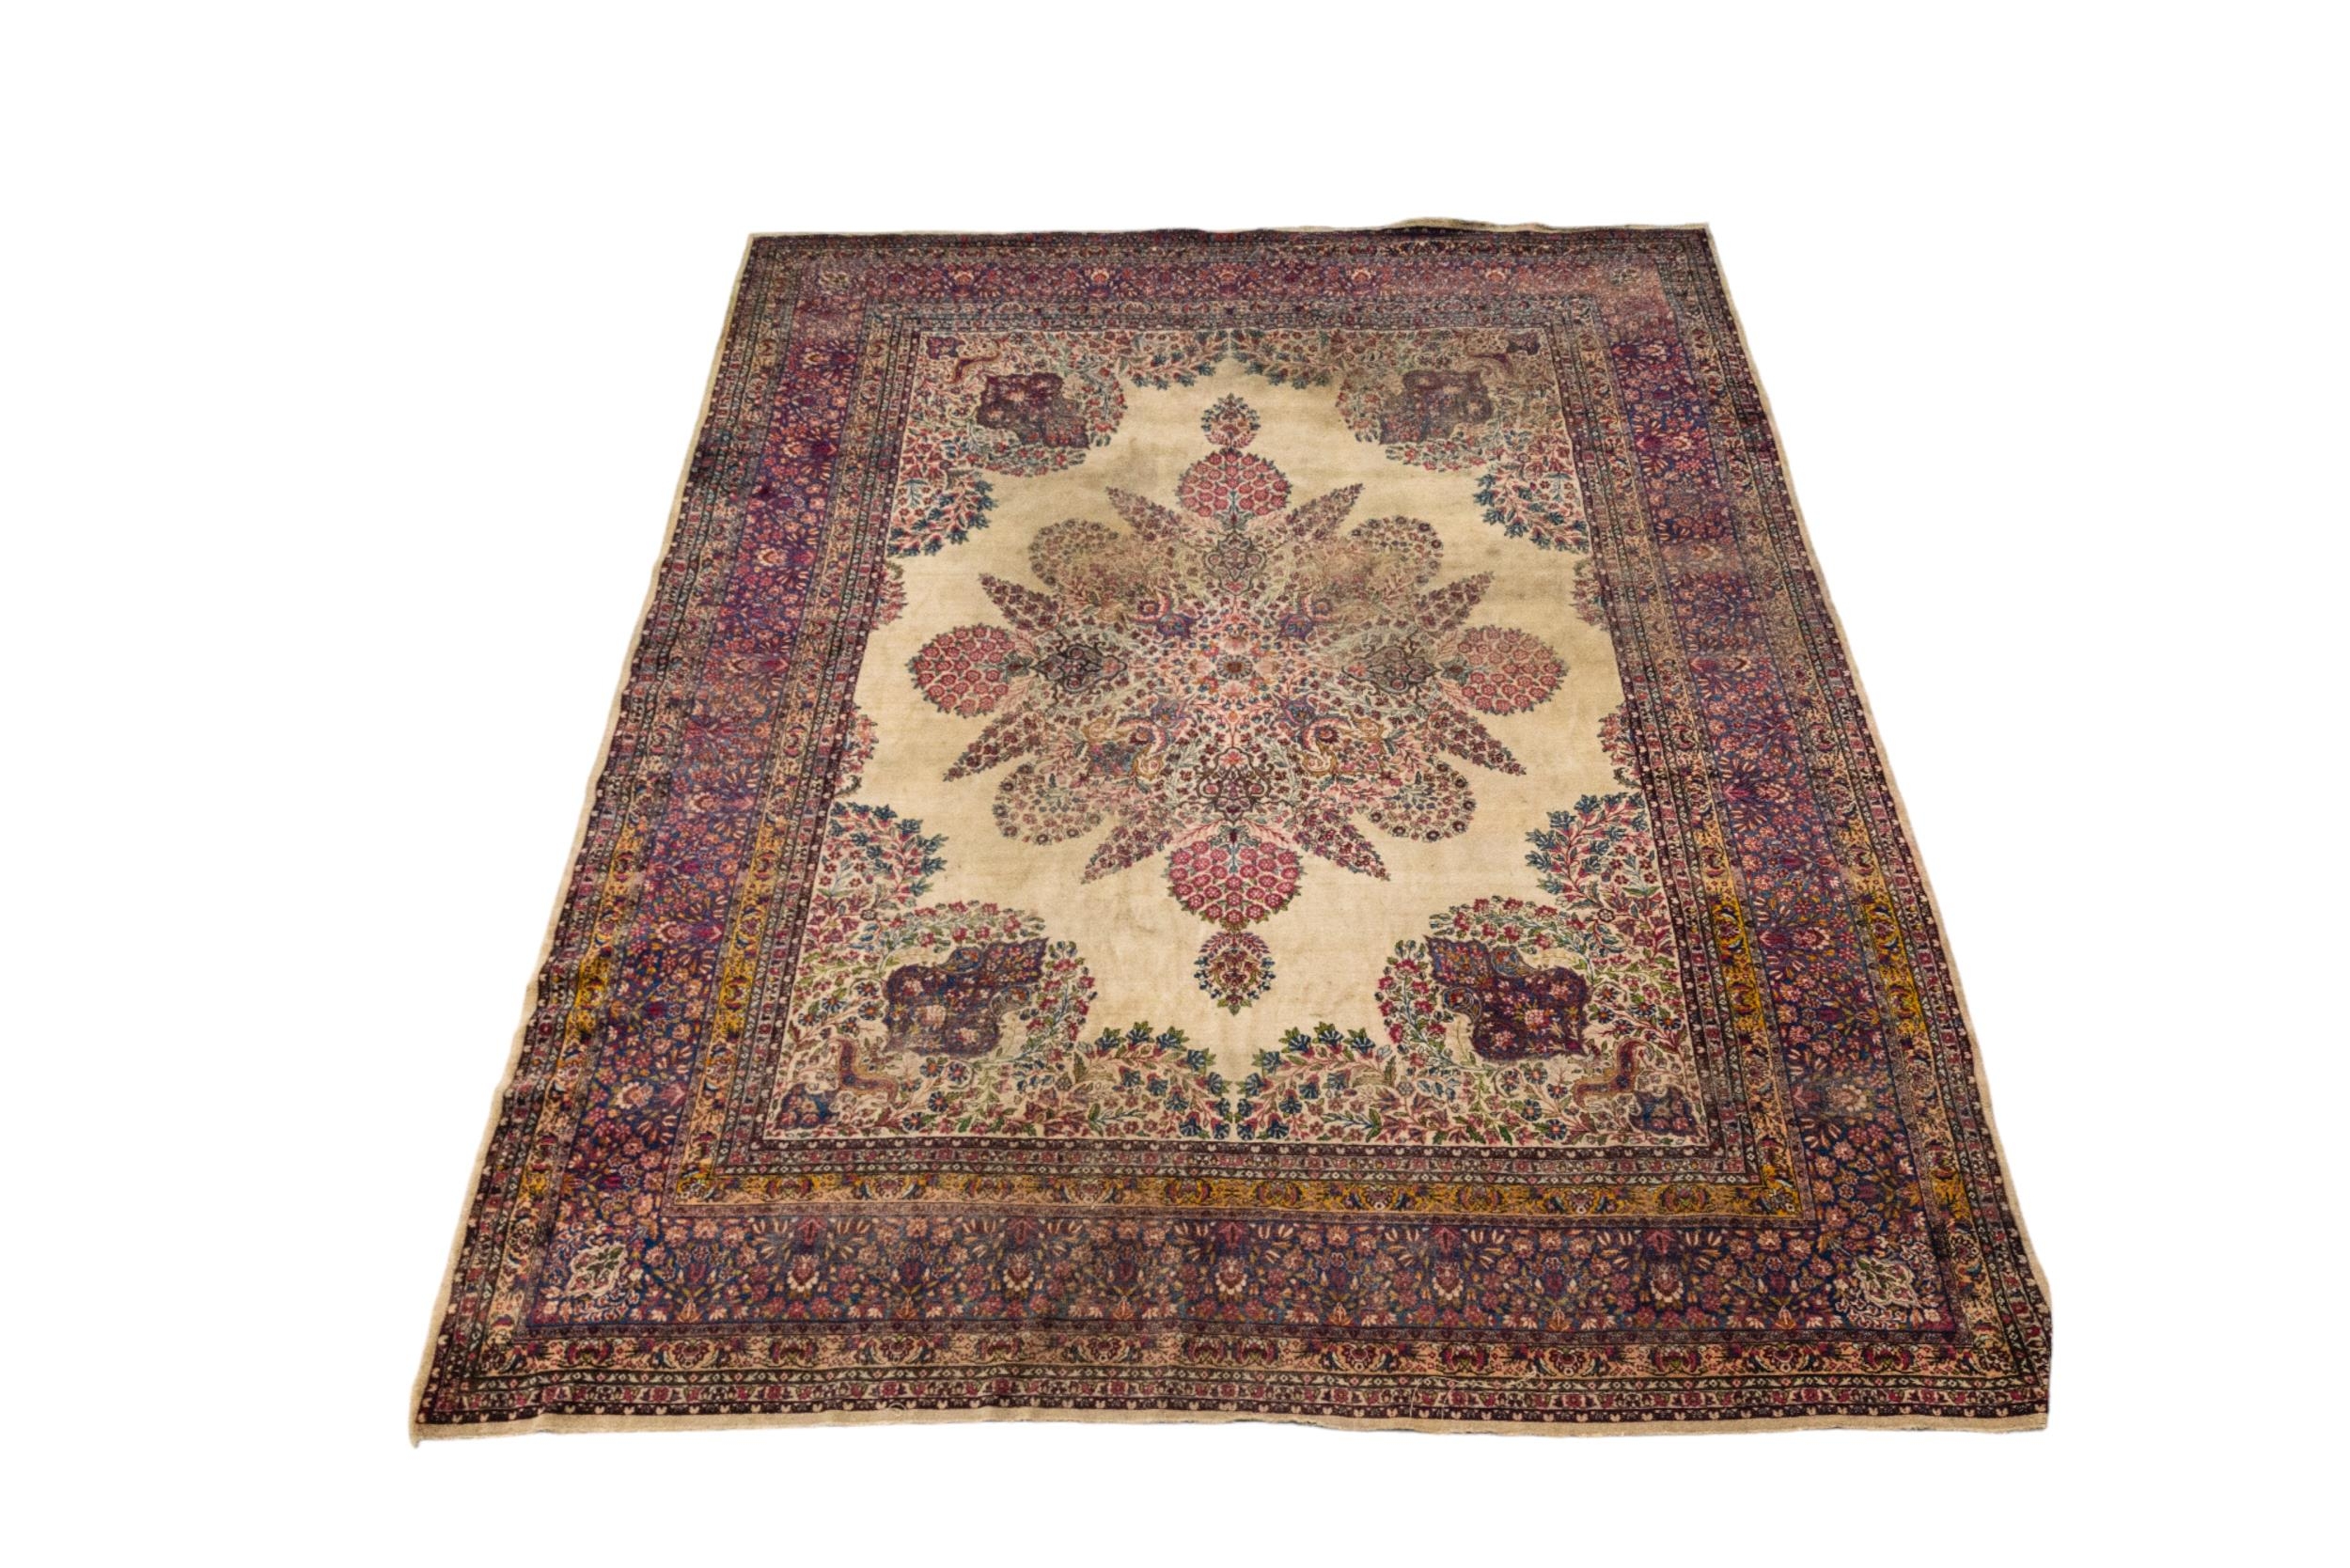 A HAND KNOTTED PERSIAN CITY RUG, EARLY 20TH CENTURY, PROBABLY KIRMAN, exceptional quality, wool.